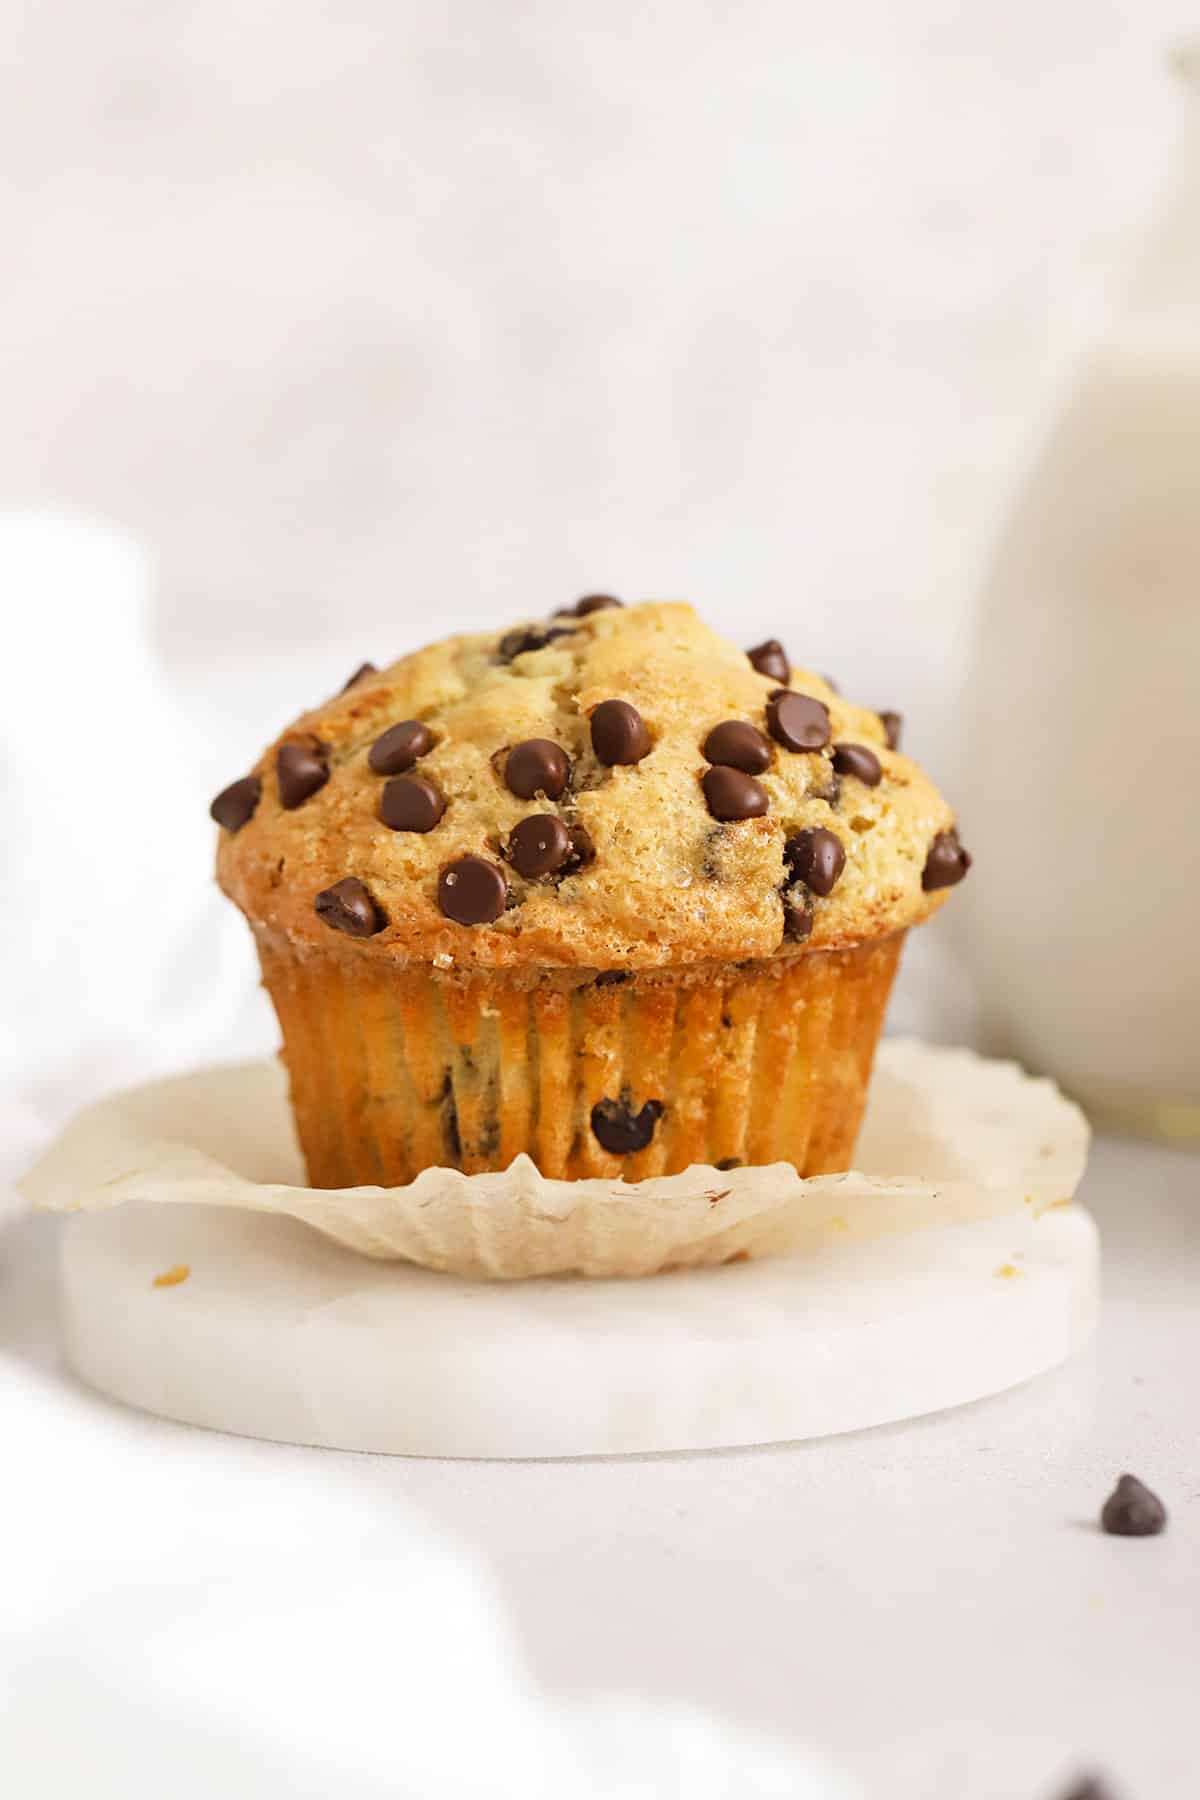 bakery style gluten-free chocolate chip muffin with mini chocolate chips